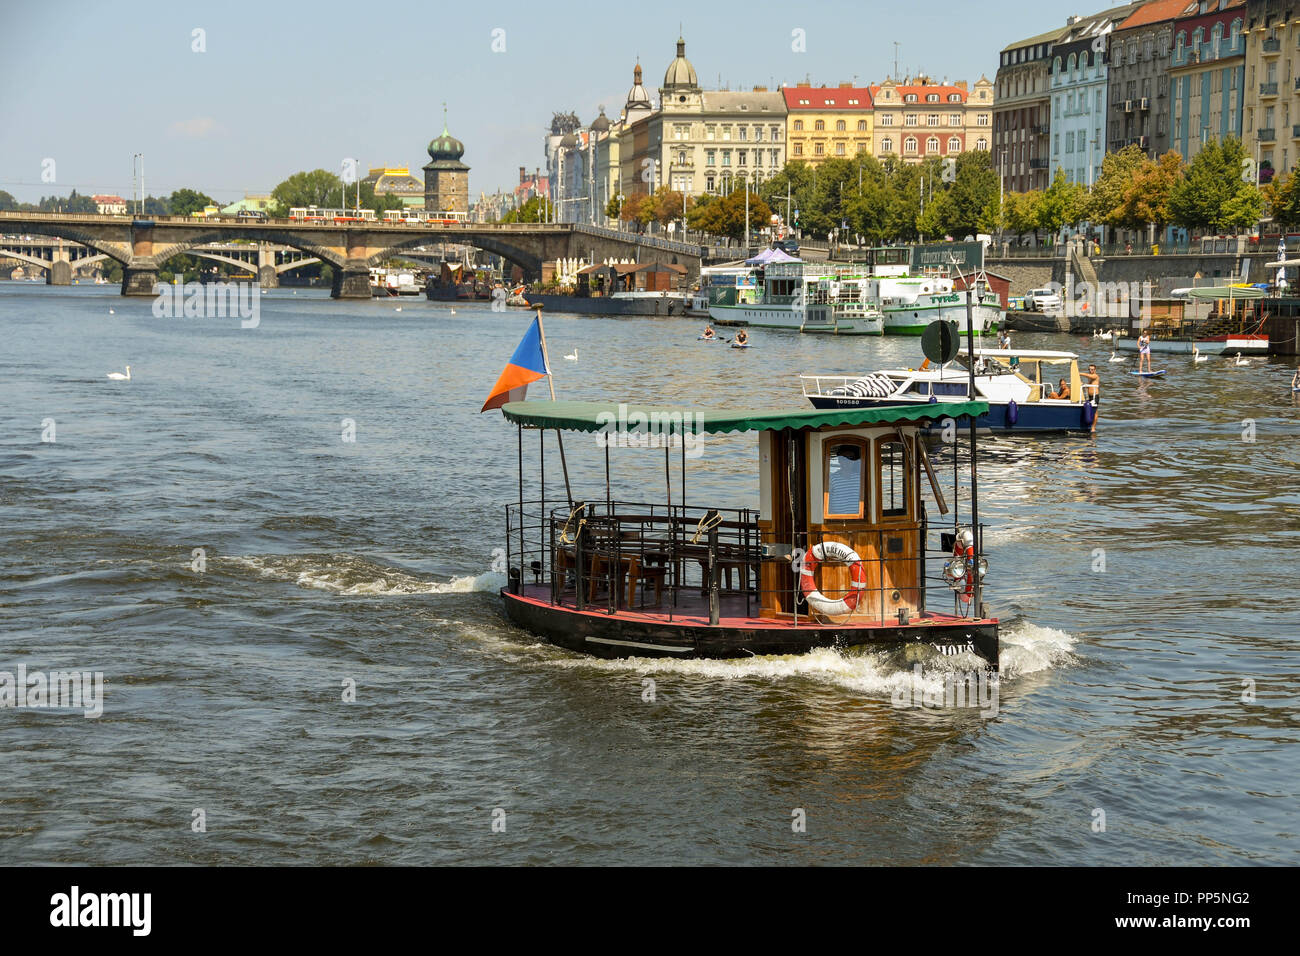 Small water taxi crossing the River Vltava in the centre of Prague Stock Photo